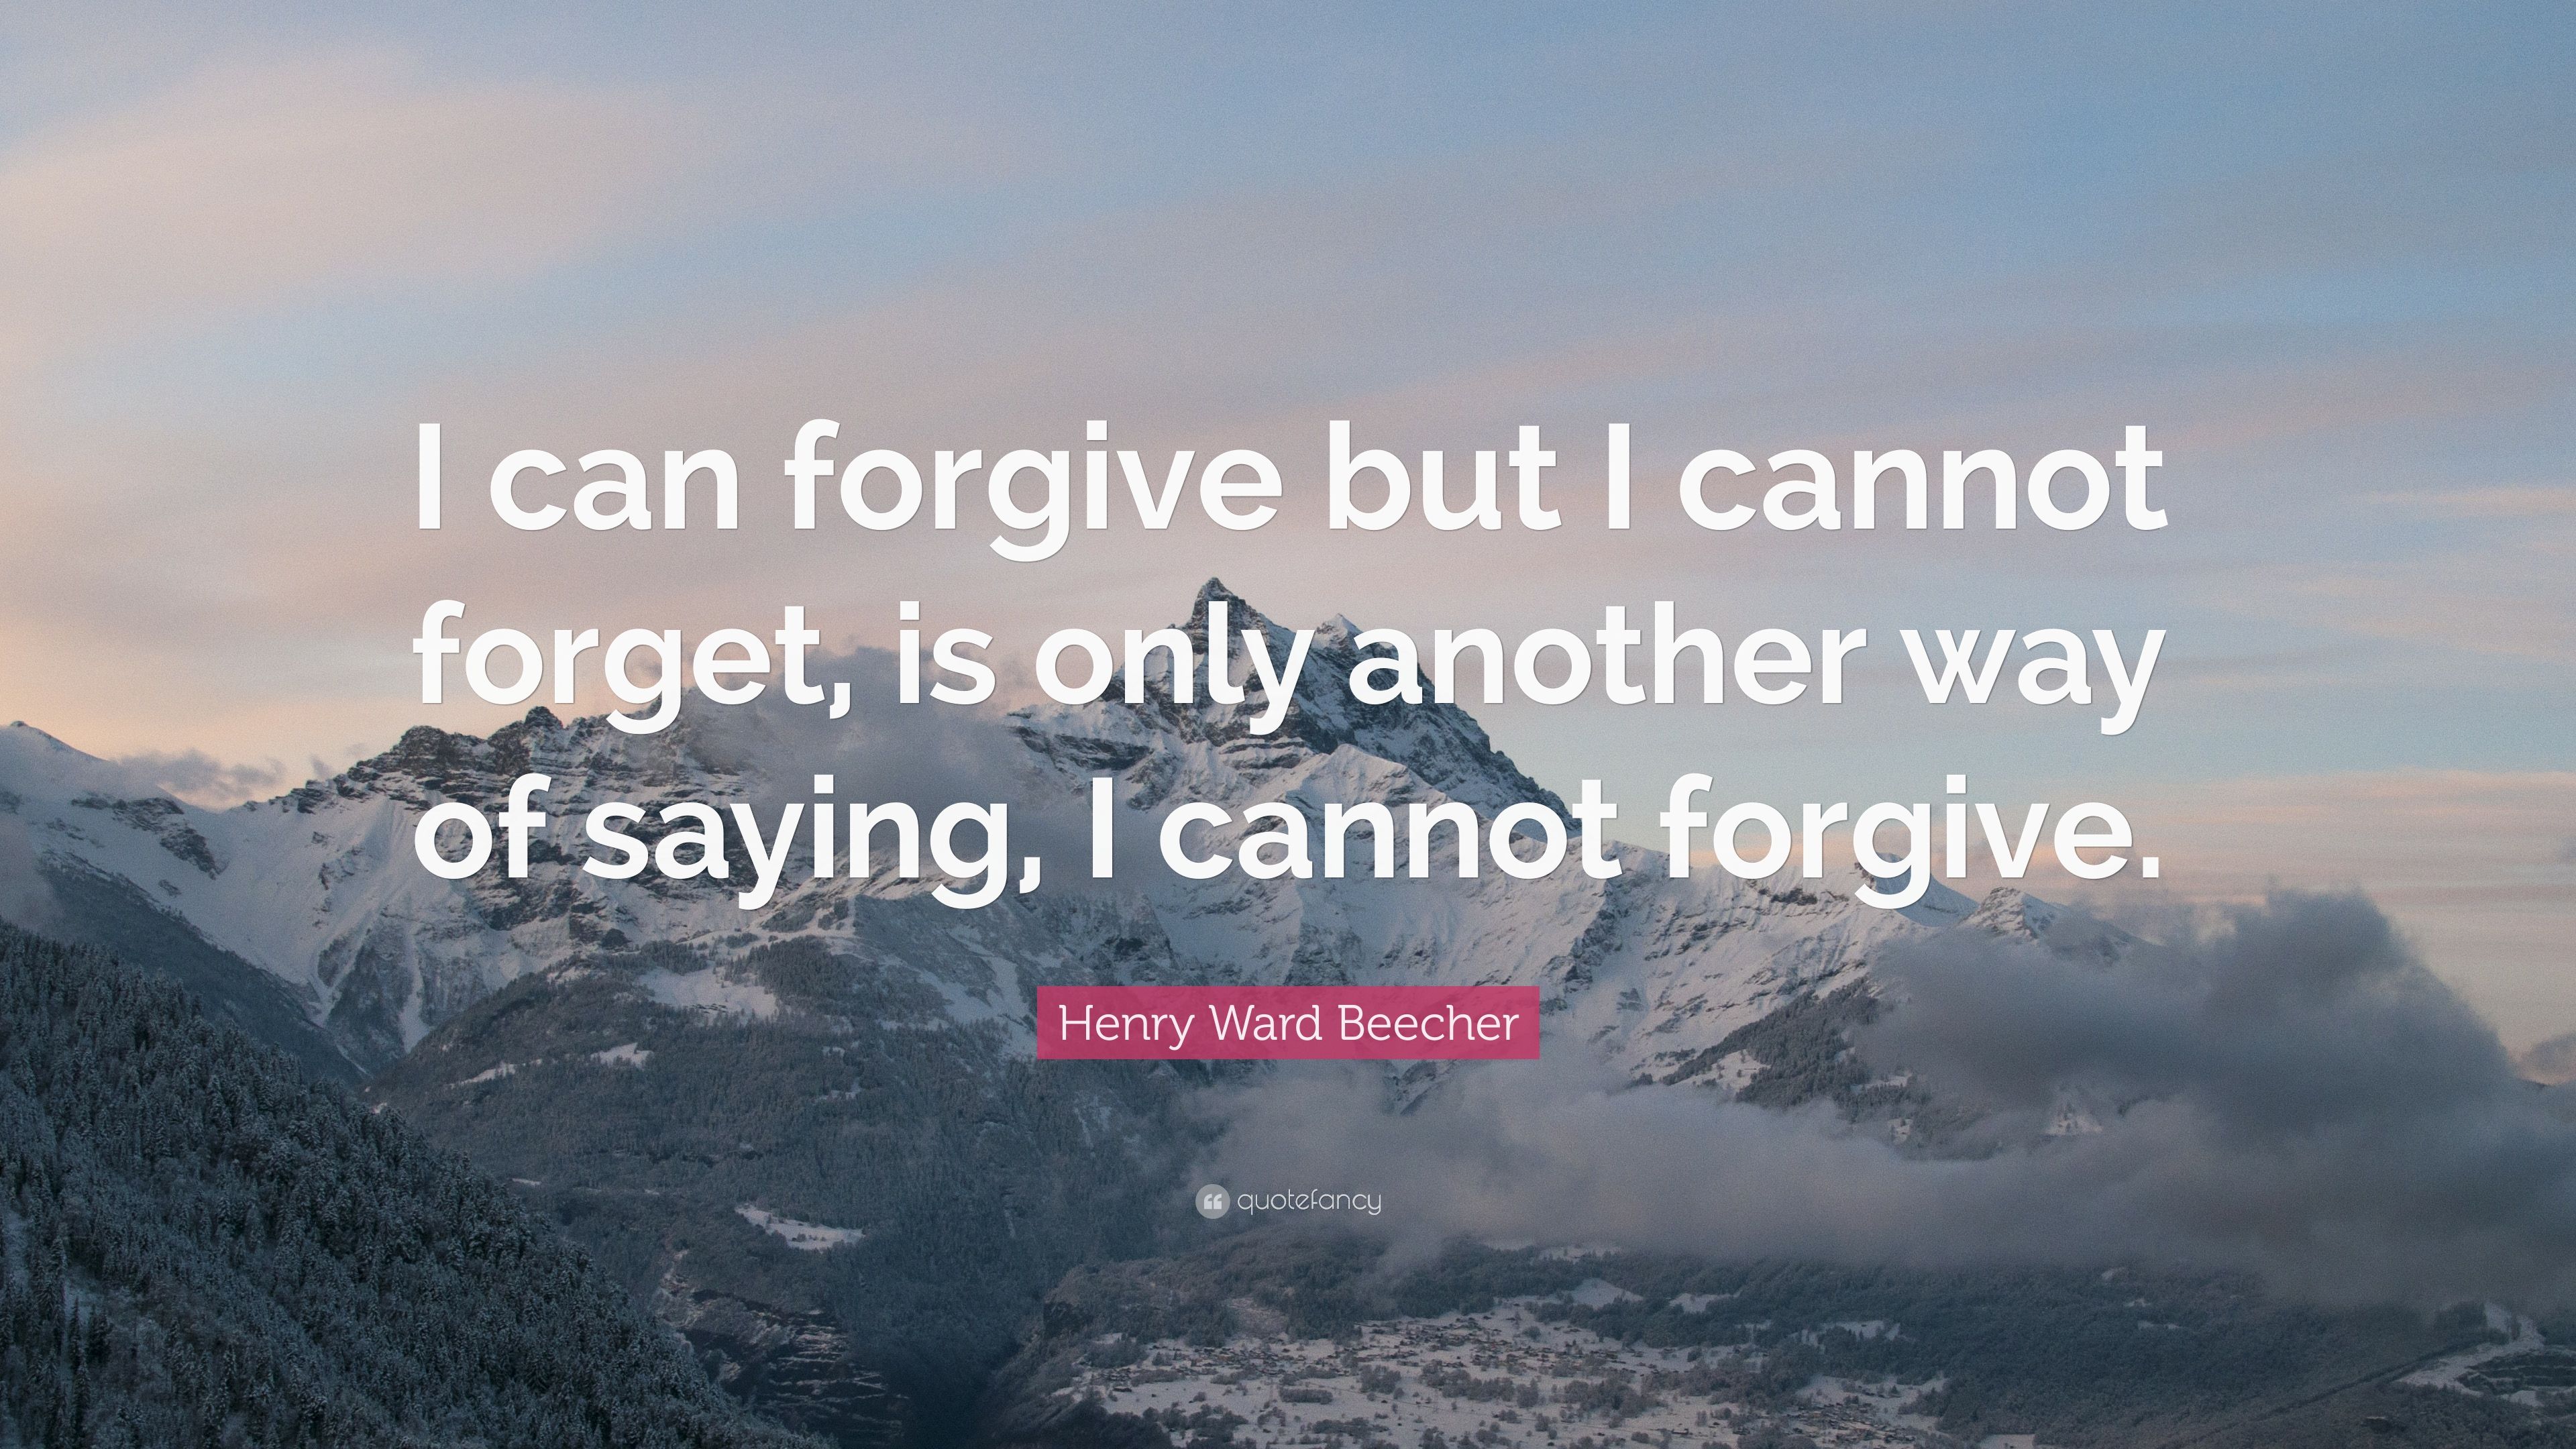 Henry Ward Beecher Quote: “I can forgive but I cannot forget, is